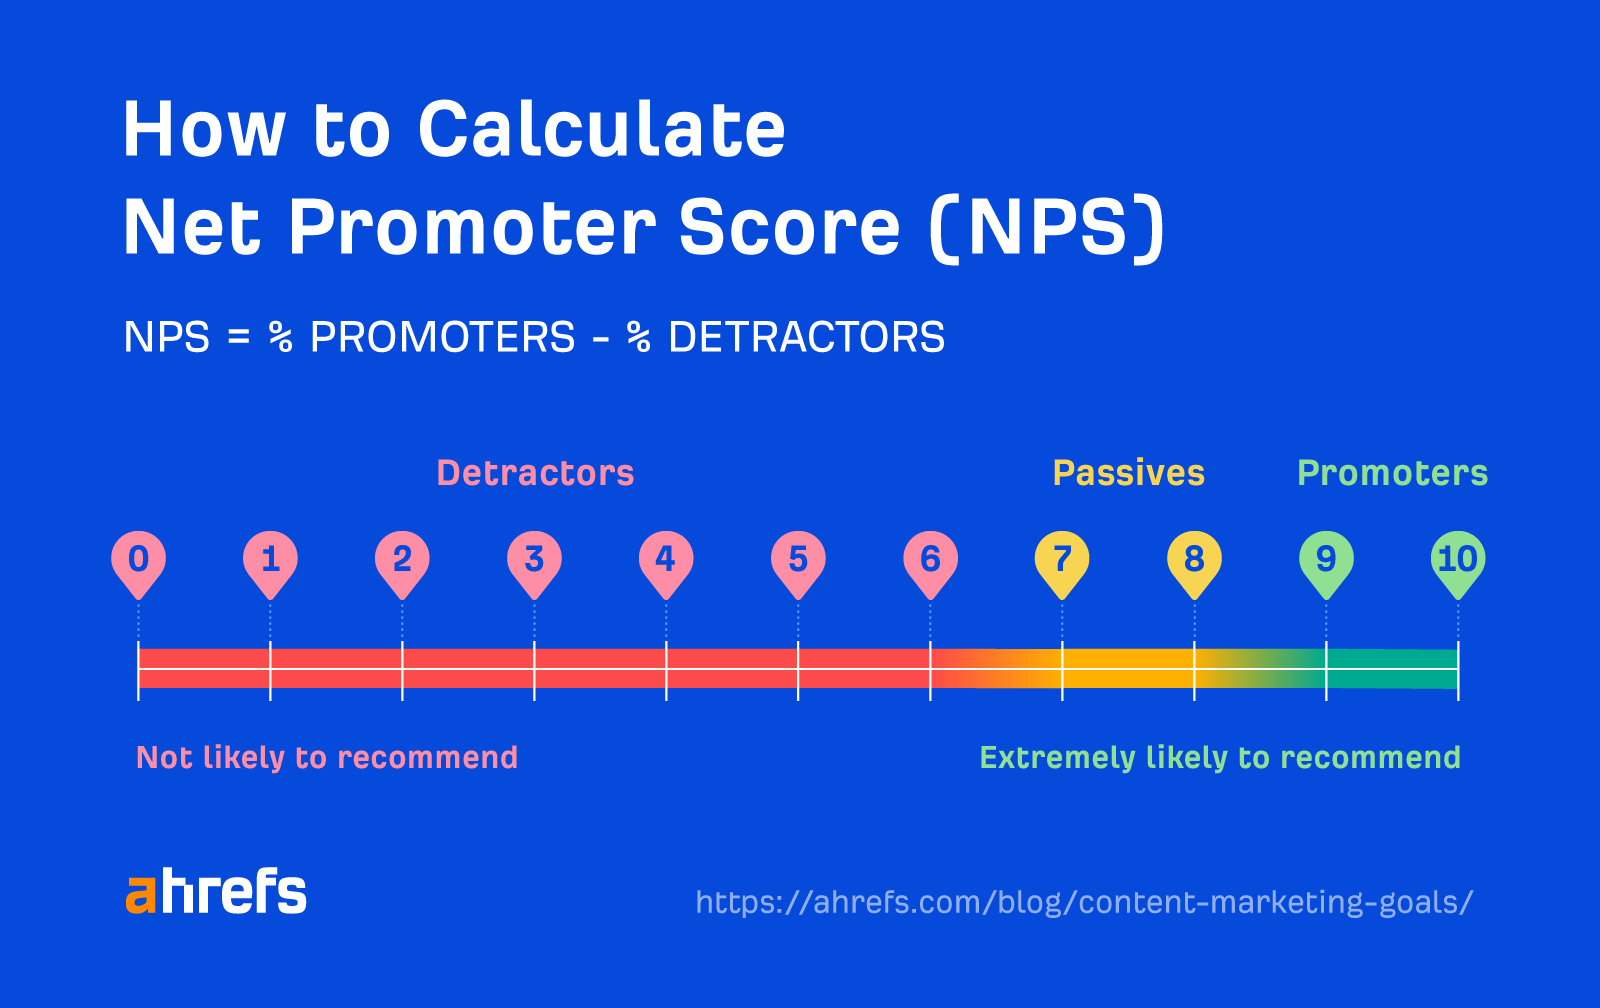 How to calculate Net Promoter Score (NPS)